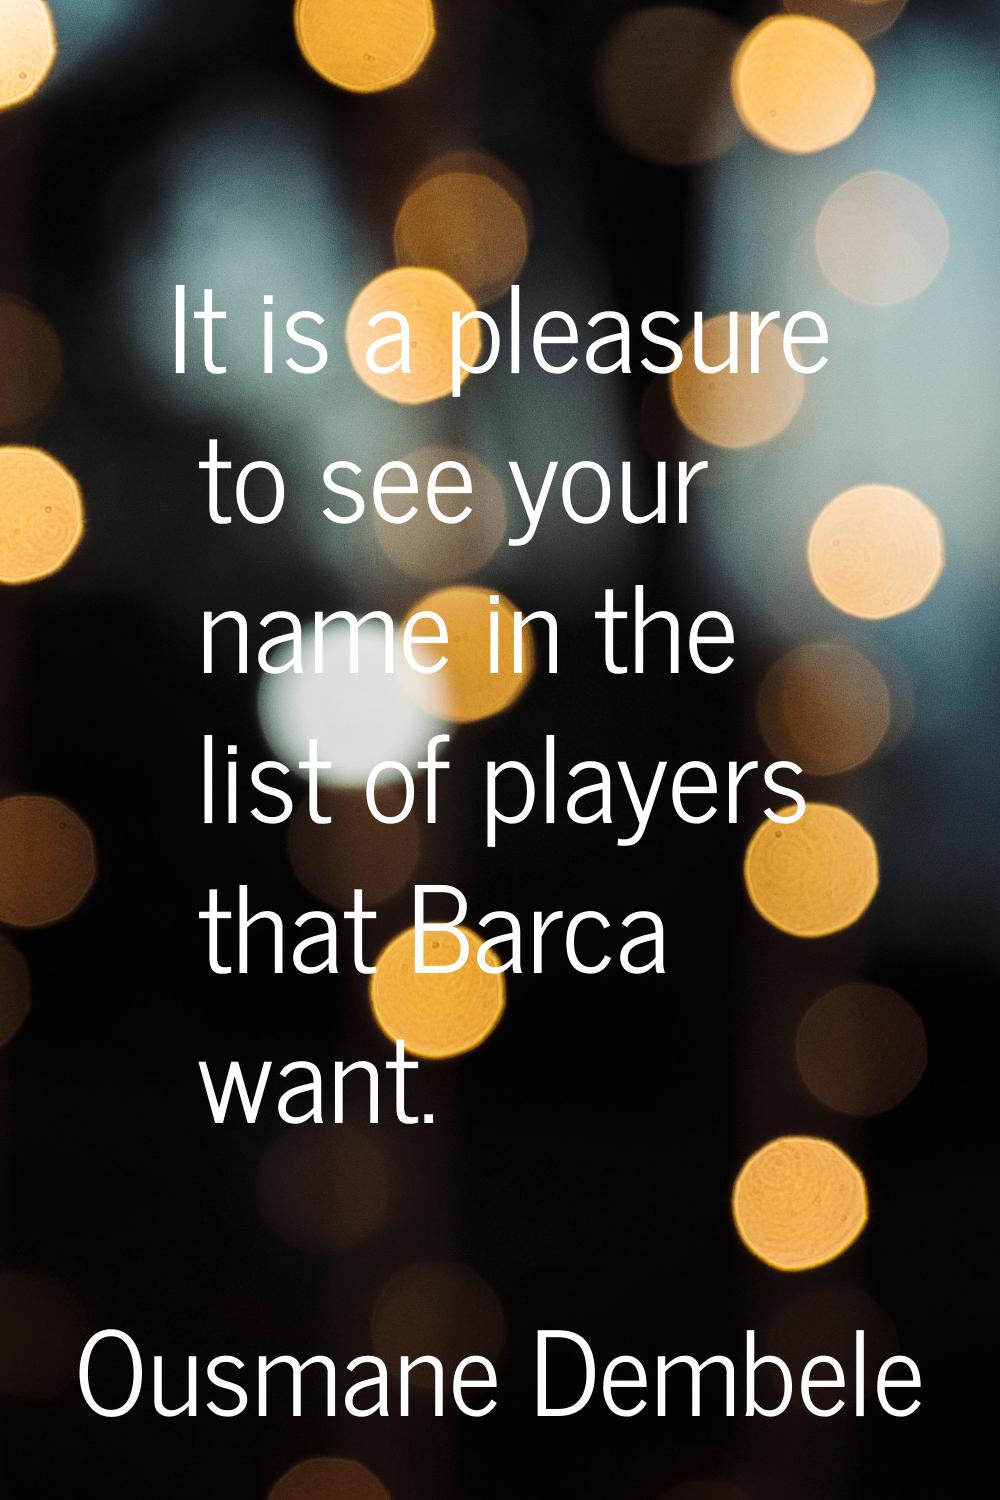 It is a pleasure to see your name in the list of players that Barca want.